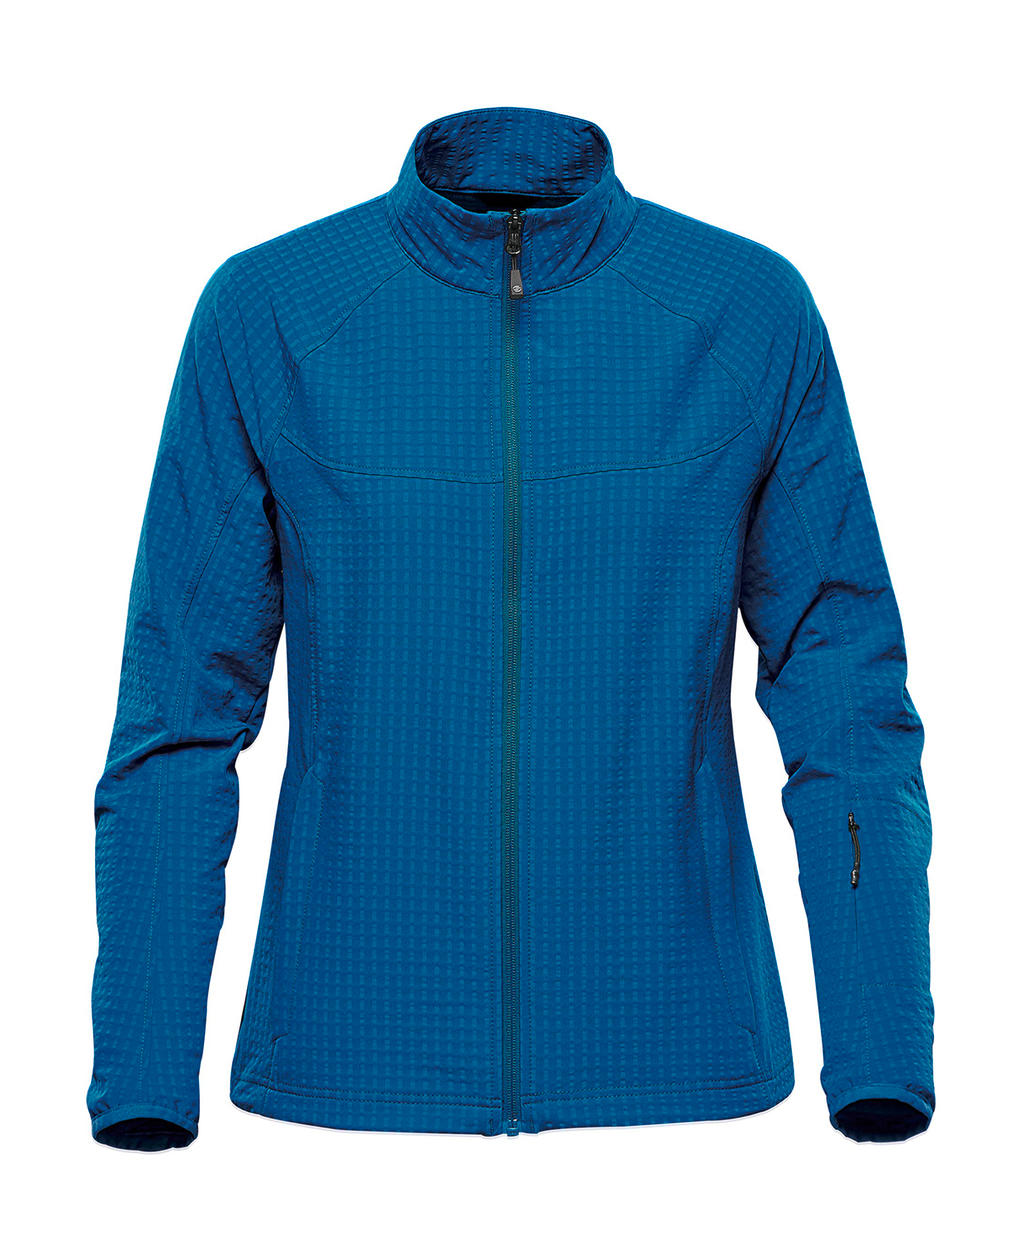  Womens Kyoto Jacket in Farbe Classic Blue